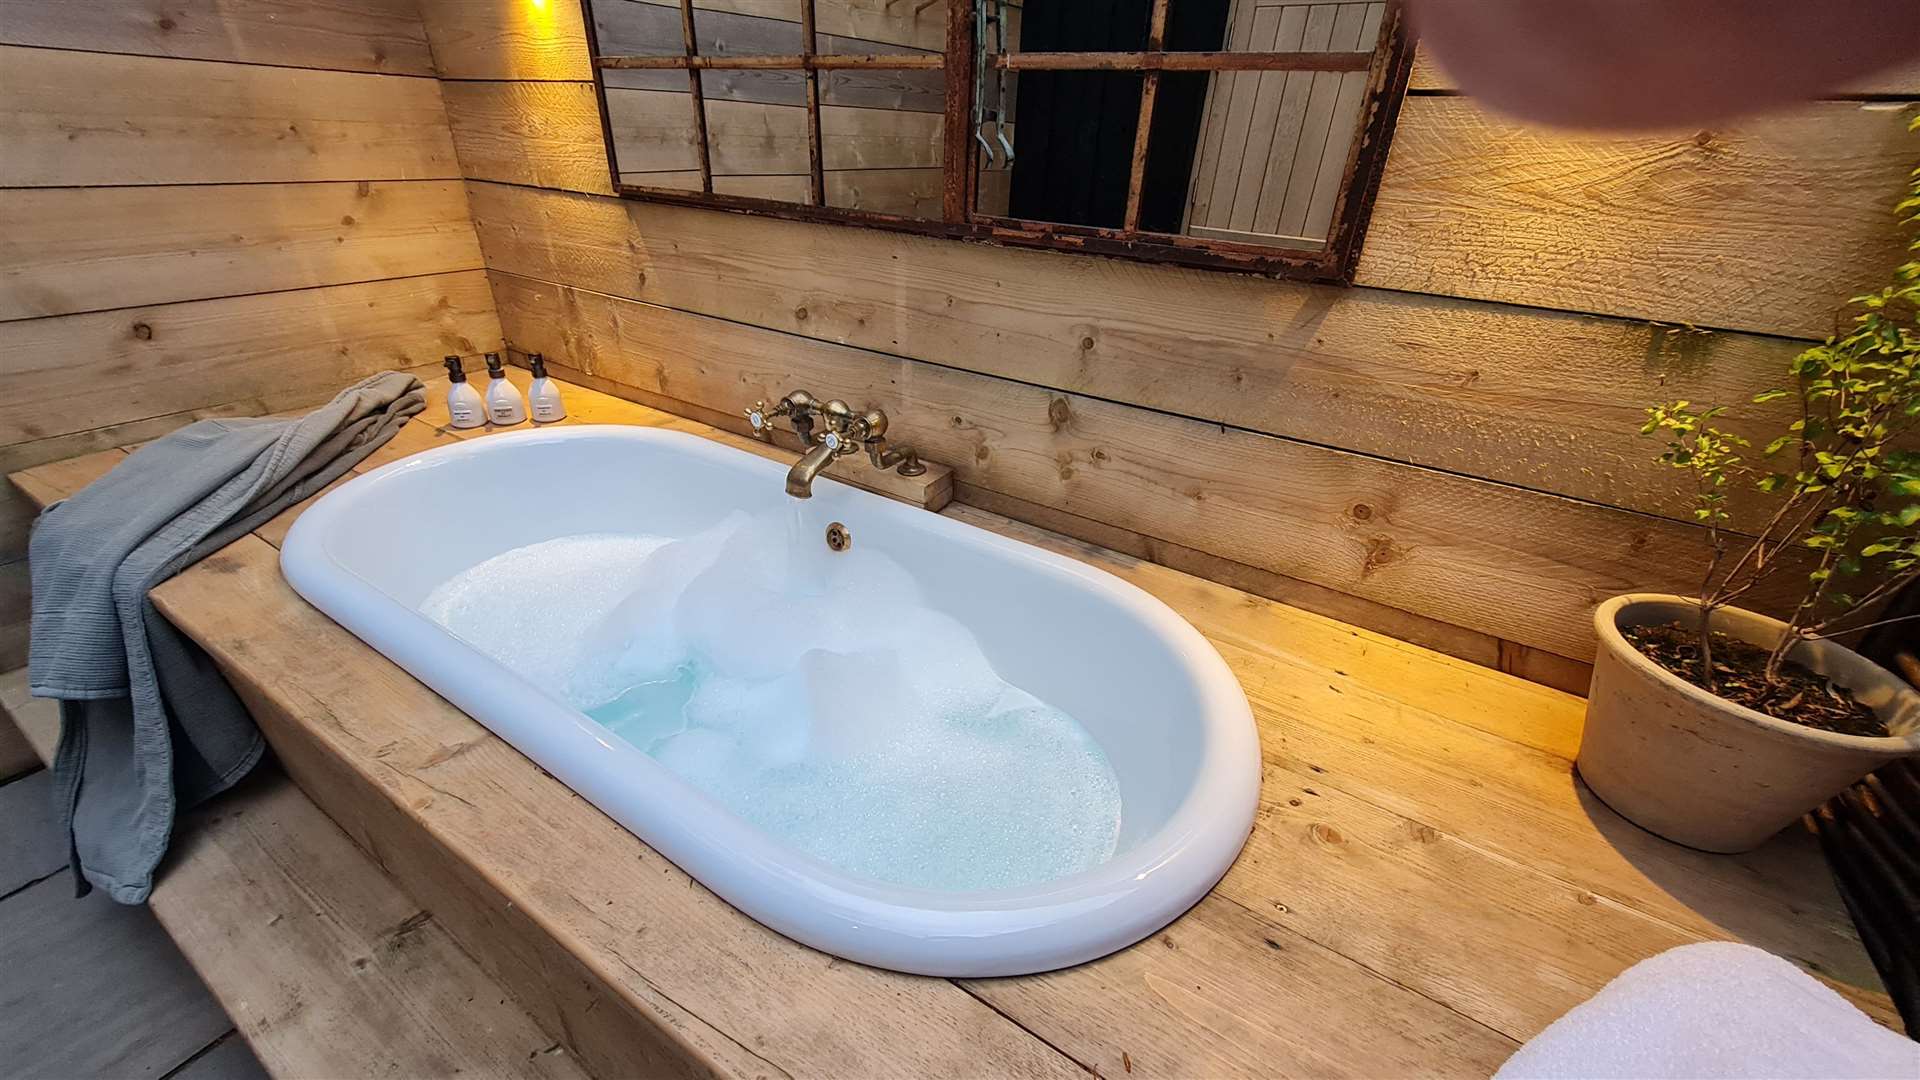 A bubble bath under the stars makes for a different experience at The Pig’s new stream wagon